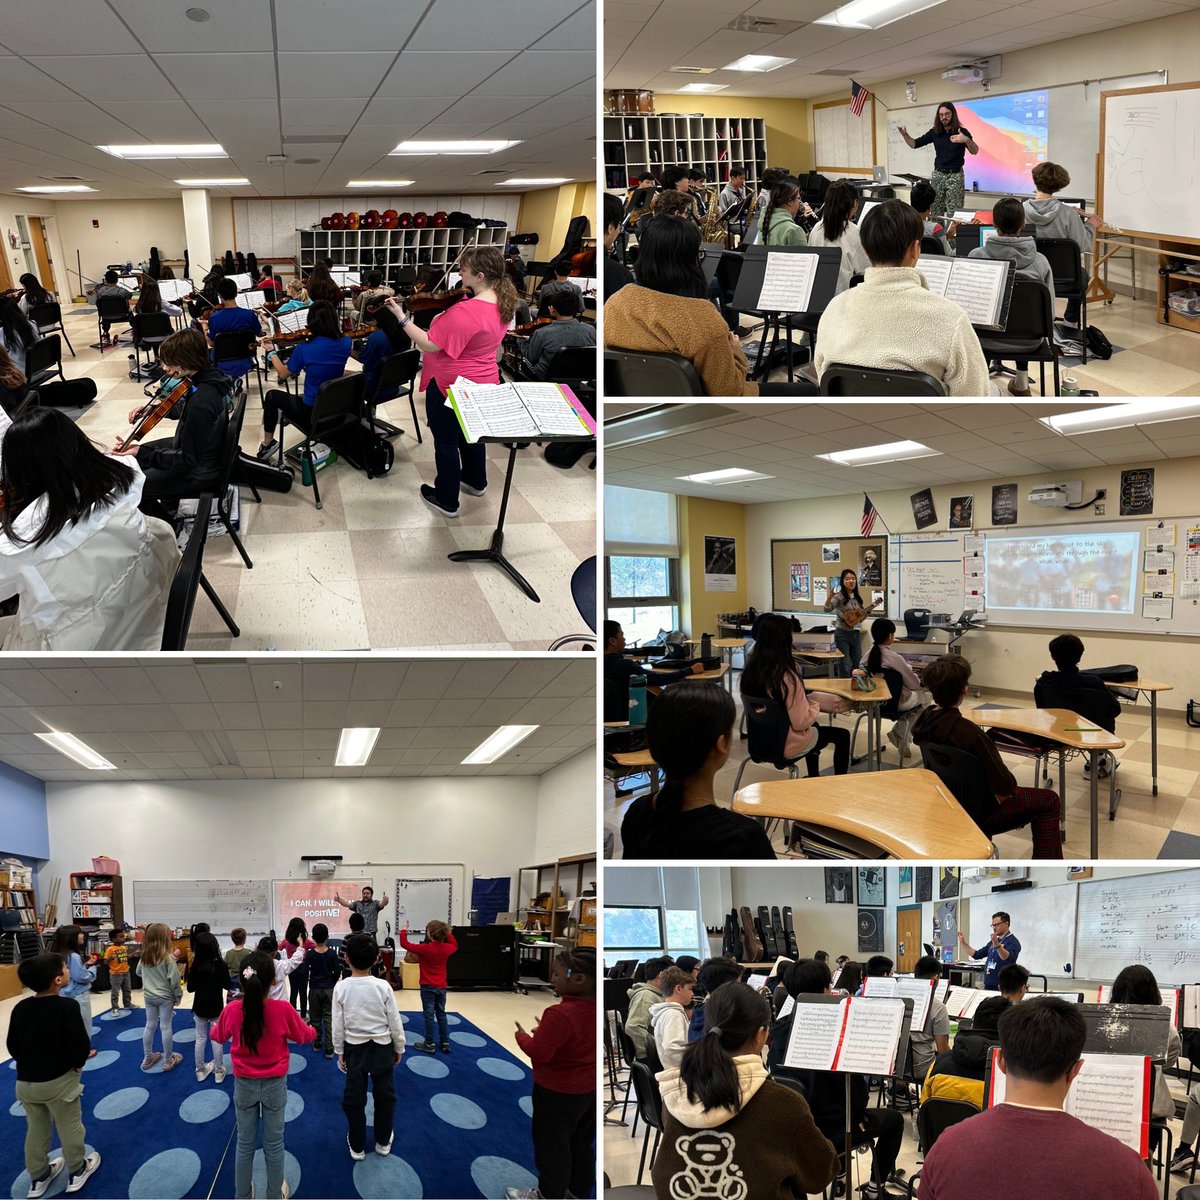 Loved getting around to classrooms and rehearsals today! We have the best students to work with ever and incredible music teachers! @lexingtonsuper @NotesByMrsC @folmads @ClarkePrincipal @LexingtonHSMa @CorduckJenny